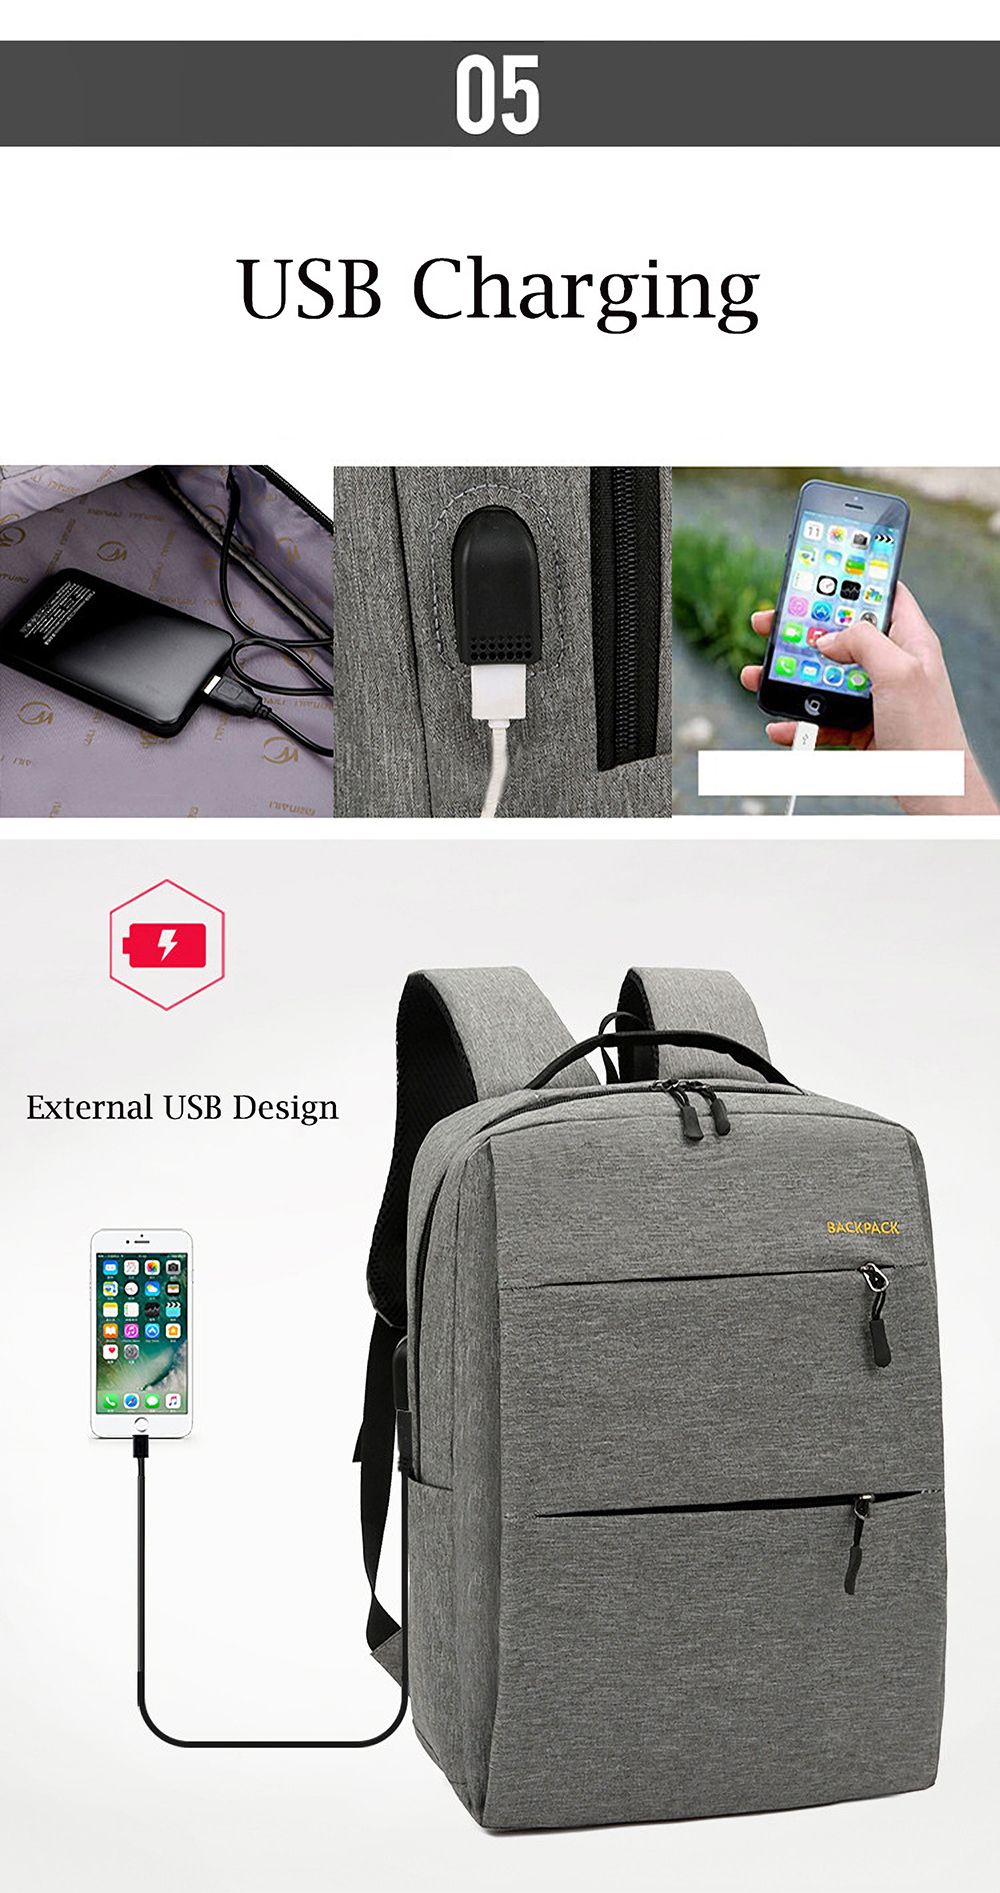 3-in-1-Laptop-Bag-for-156-Inch-with-USB-Charging-Computer-Backpack-Casual-Travel-Business-Shoulder-B-1553372